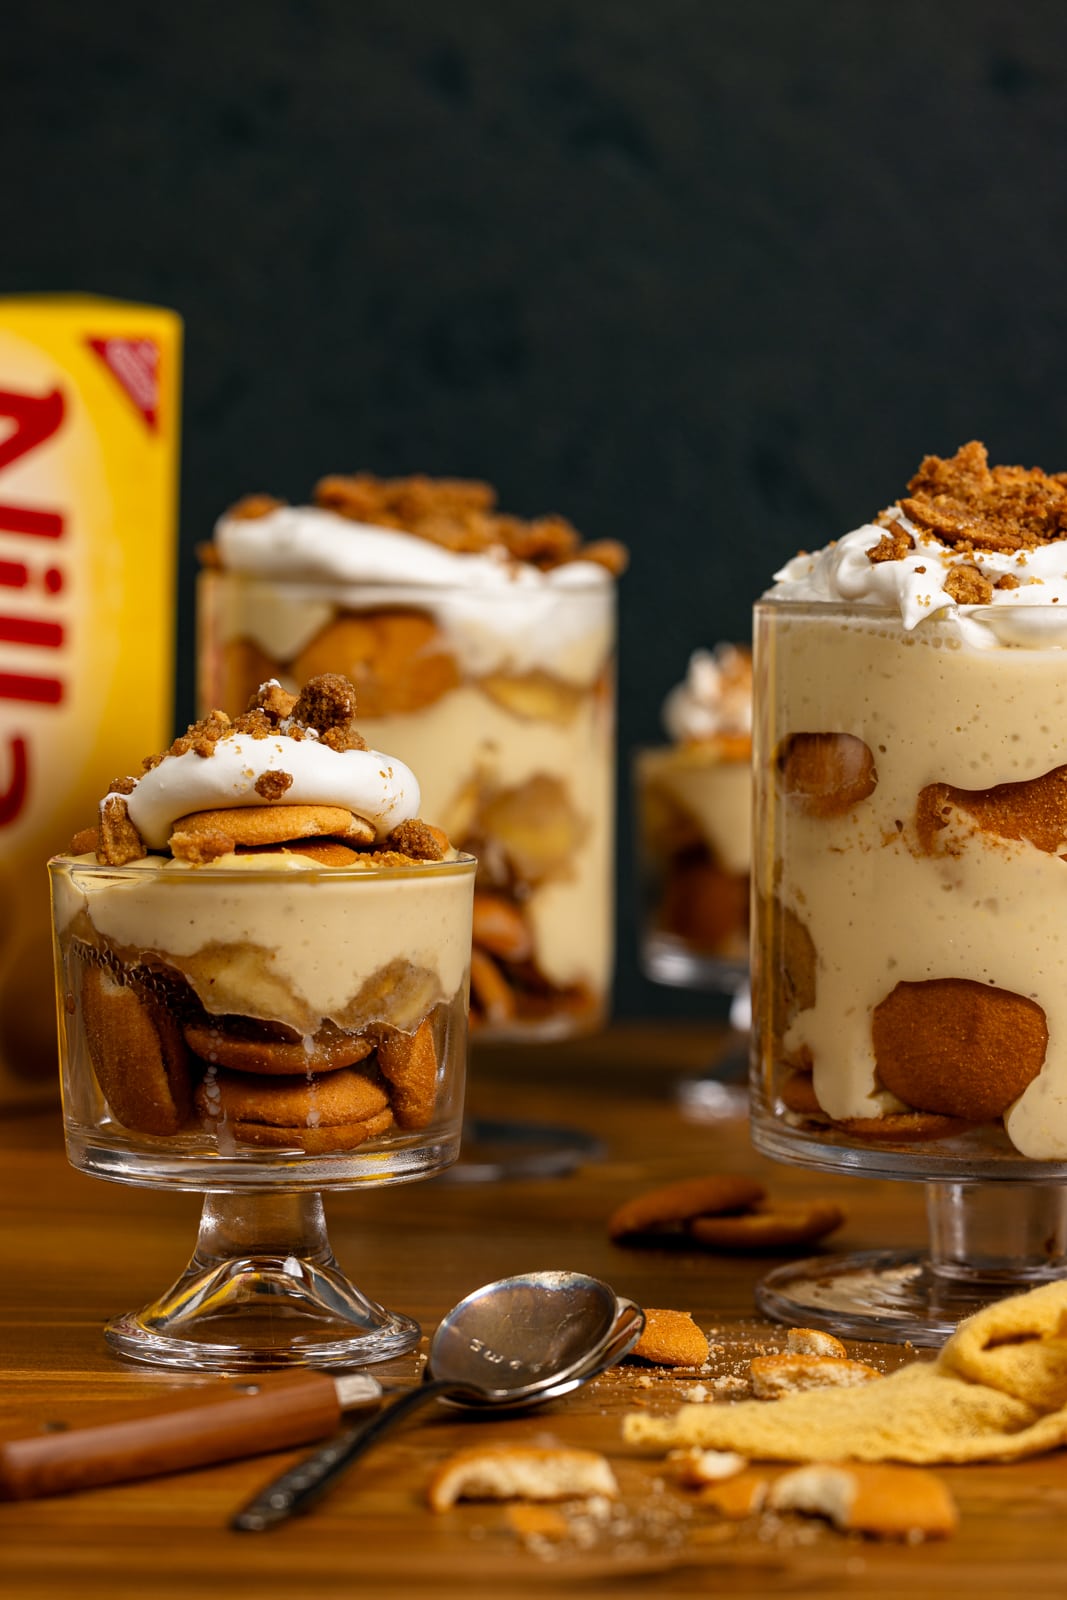 Banana pudding in trifle bowls with a box of vanilla wafers and spoons.